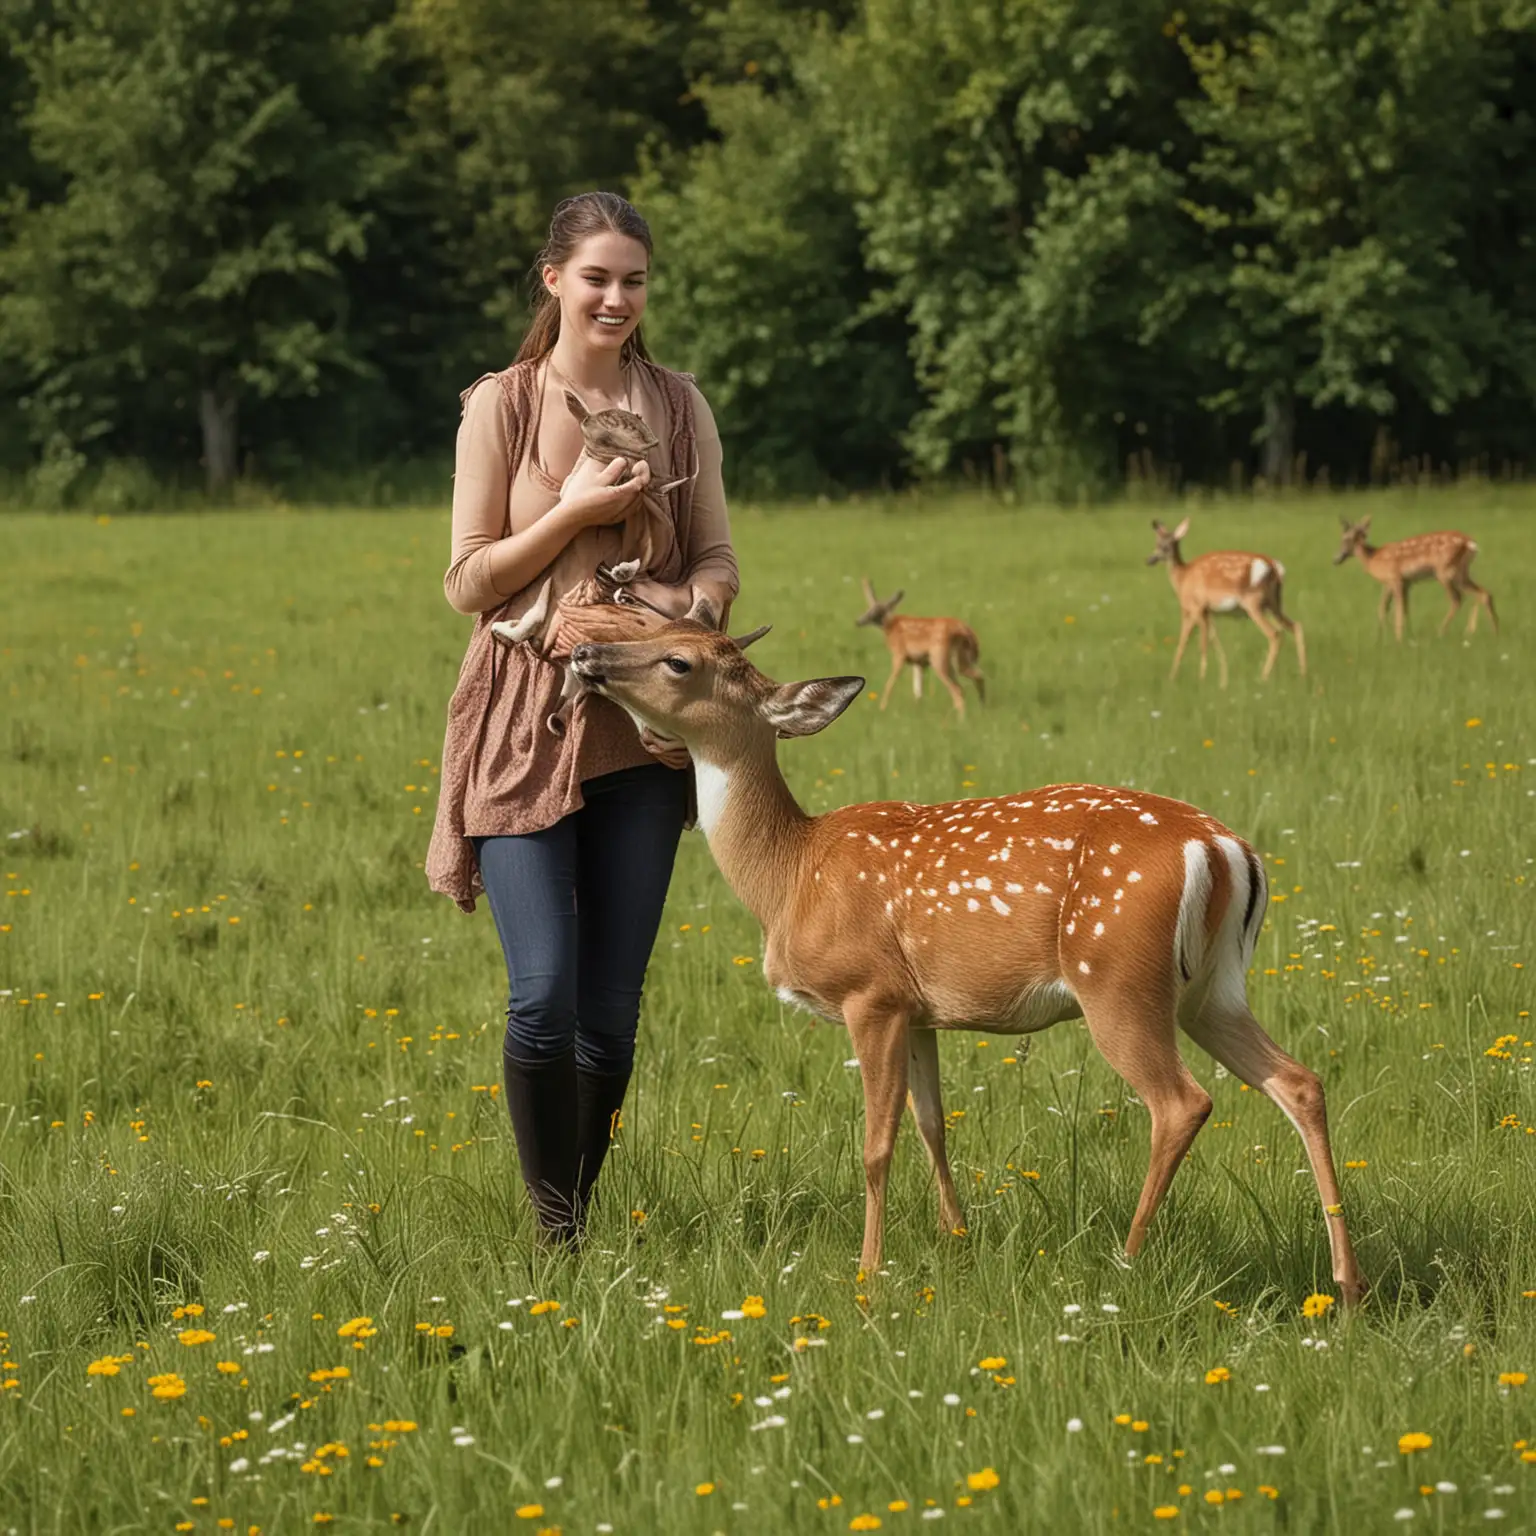 Graceful Encounter Deer and Young Woman in a Meadow